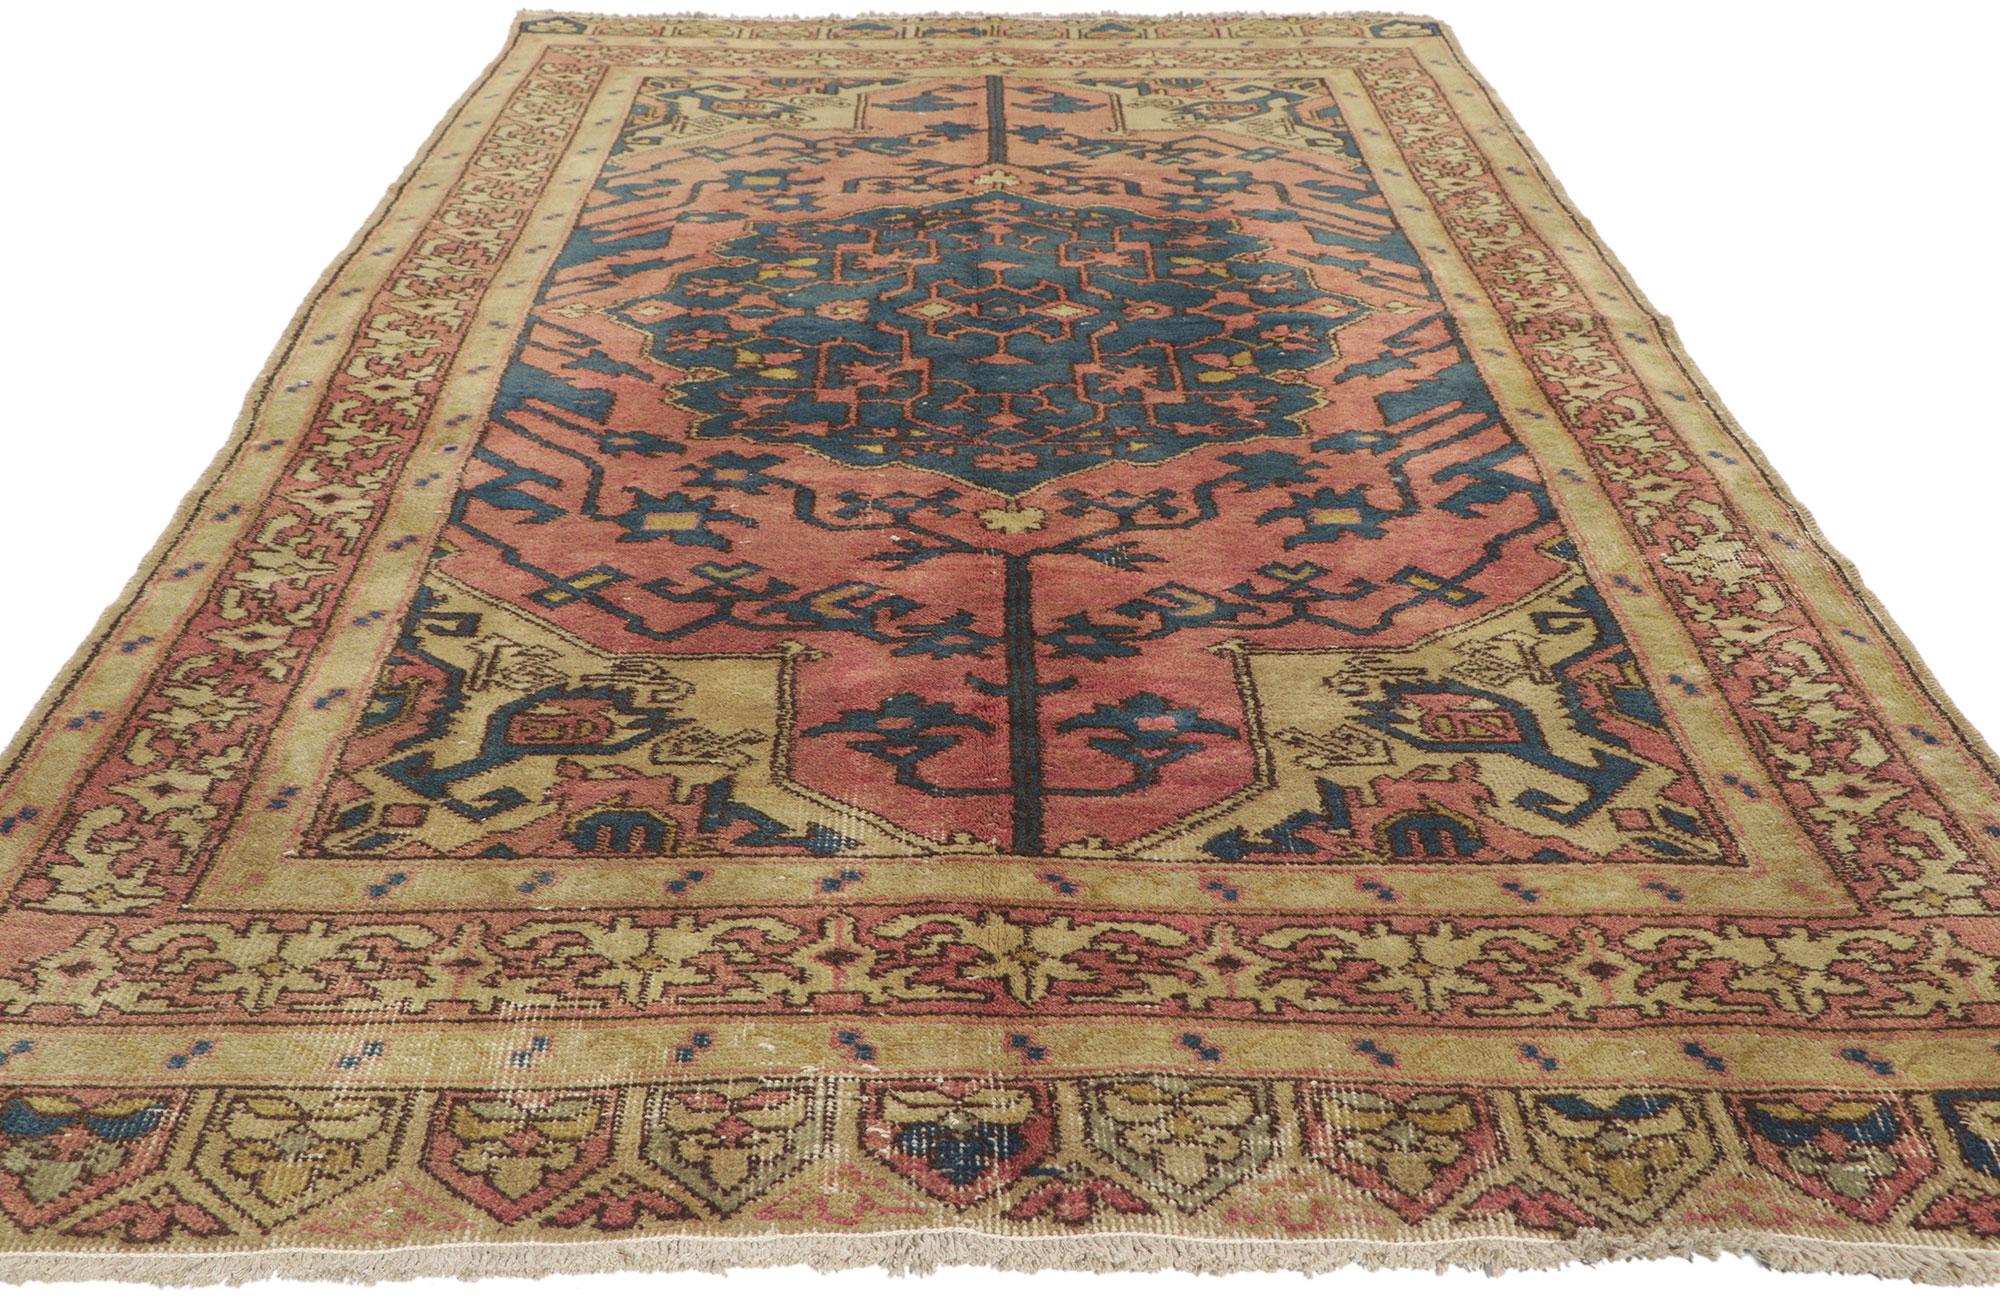 Pair of Matching Vintage Turkish Sivas Rugs with Rustic Earth-Tone Colors For Sale 4